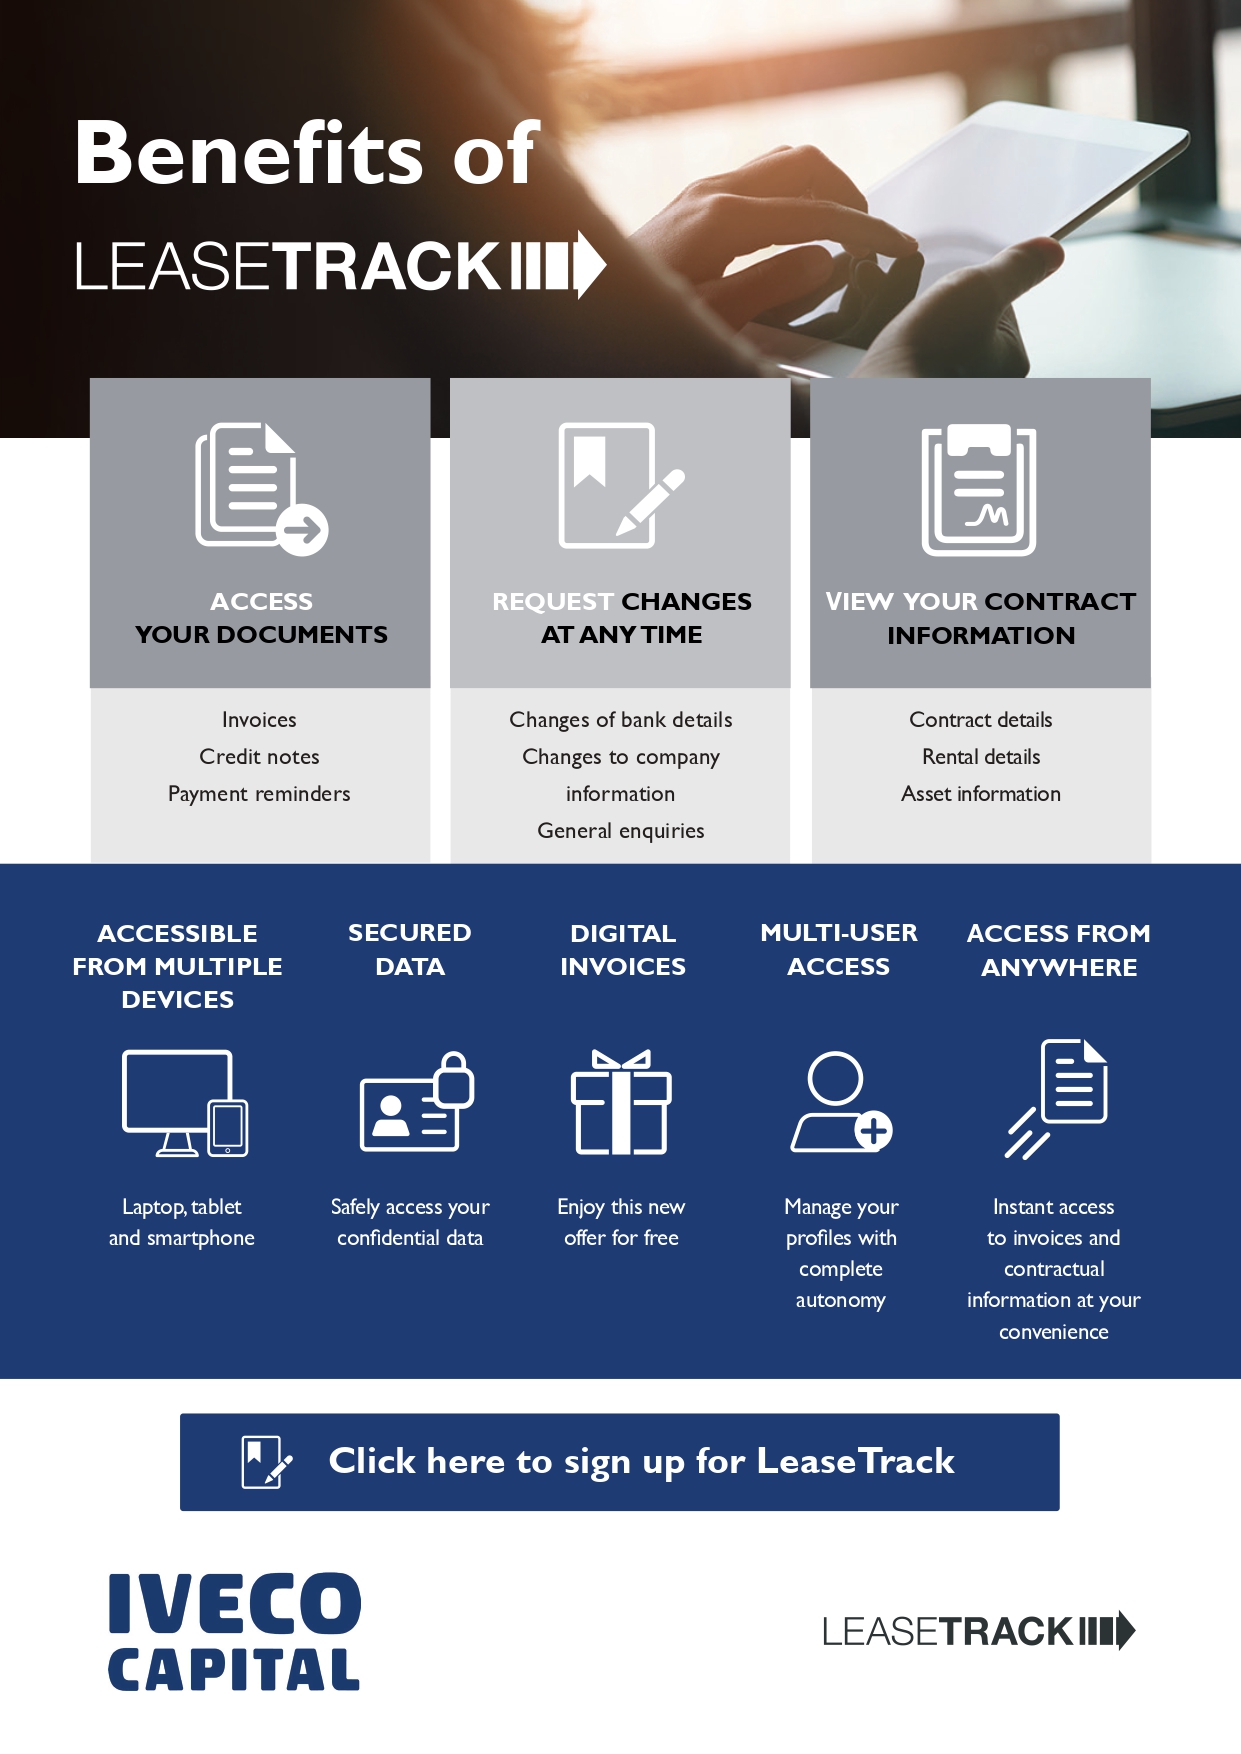 https://ivecocapital.leasetrack.fineasy.com